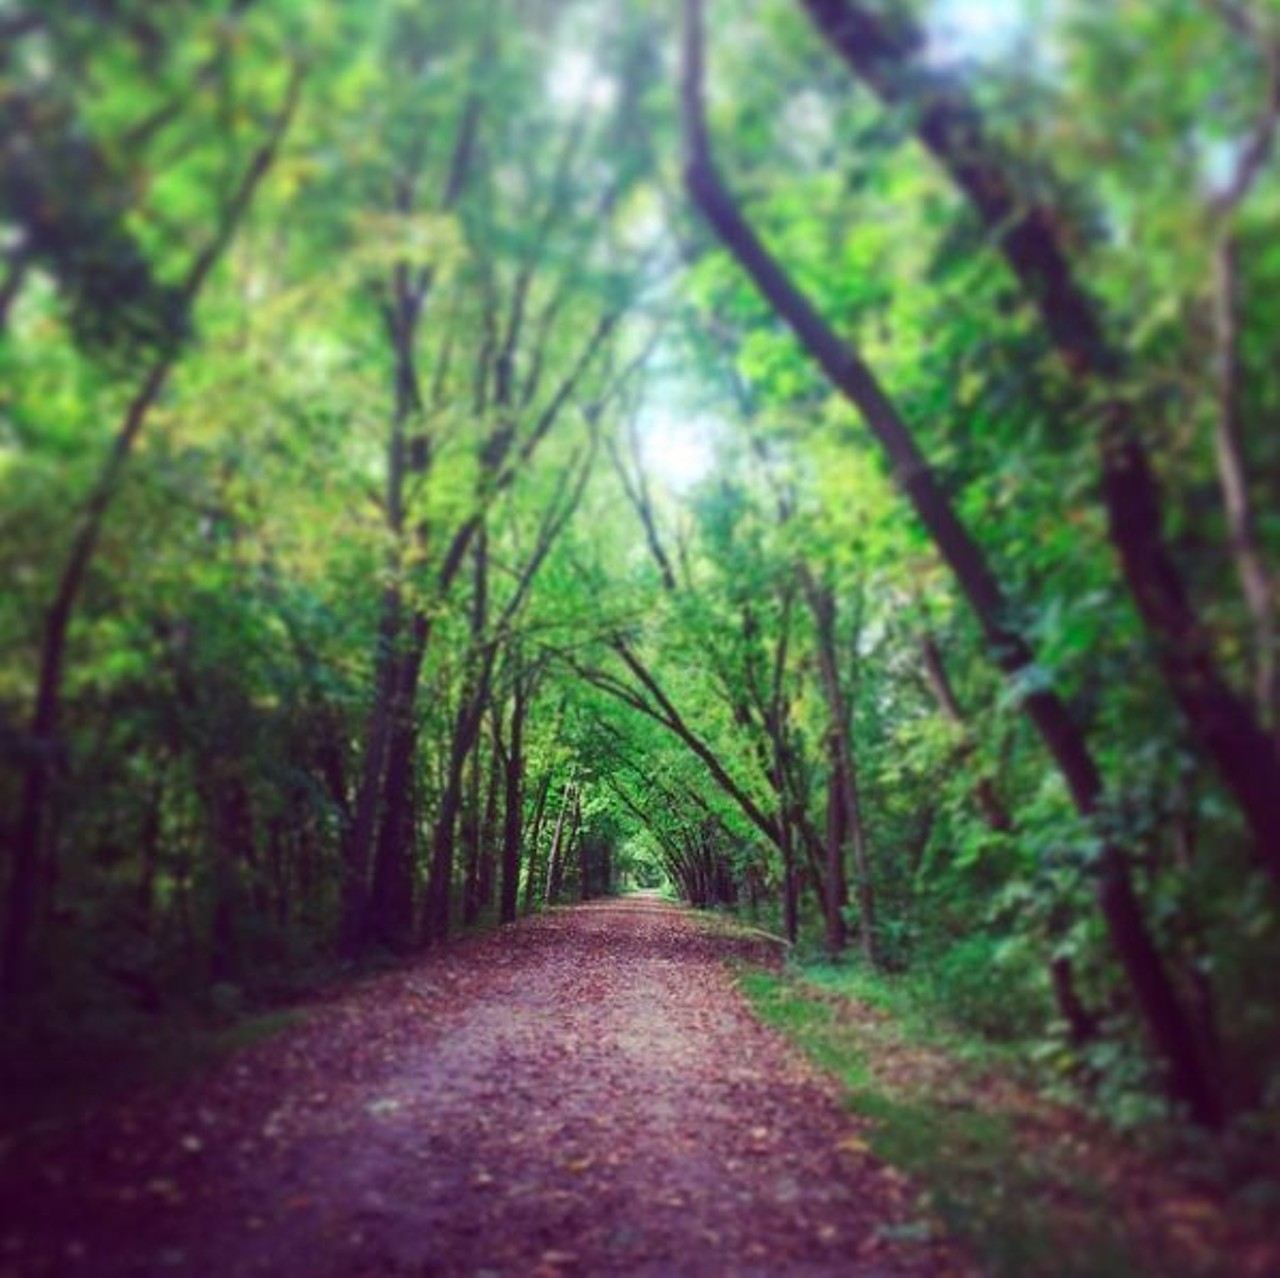 West Bloomfield Trail
This mostly unpaved trail stretches from Orchard Lake Road to Haggerty Road. With over 7 miles of trail, this is the perfect place to go for a long run. You will come across nature preserves and scenic overlooks, which makes this a great getaway from city running. 
Photo via IG user @chelsea.jolly